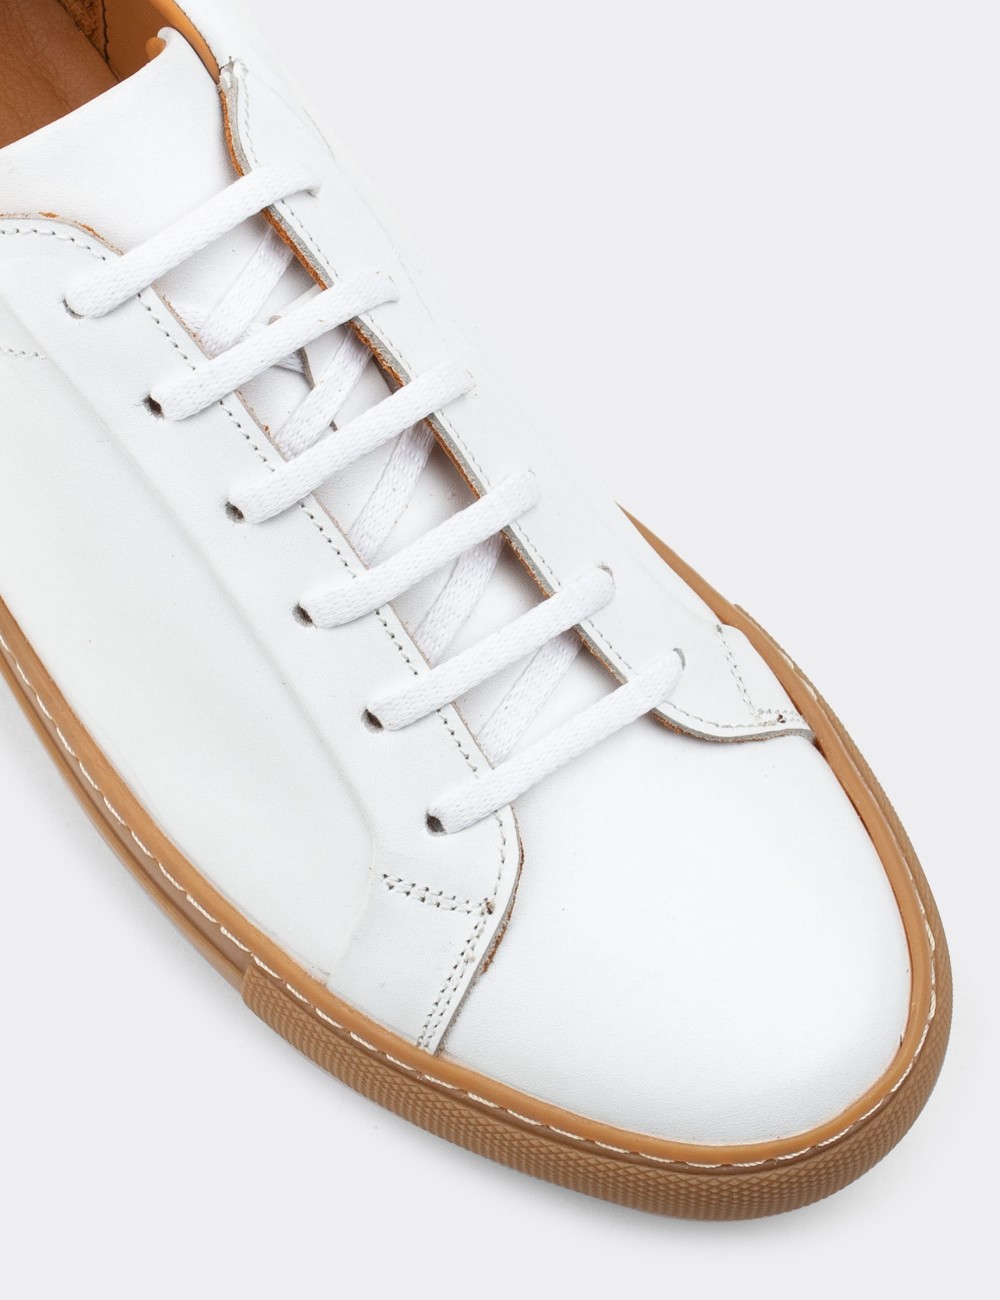 White  Leather Sneakers - 01829MBYZC04